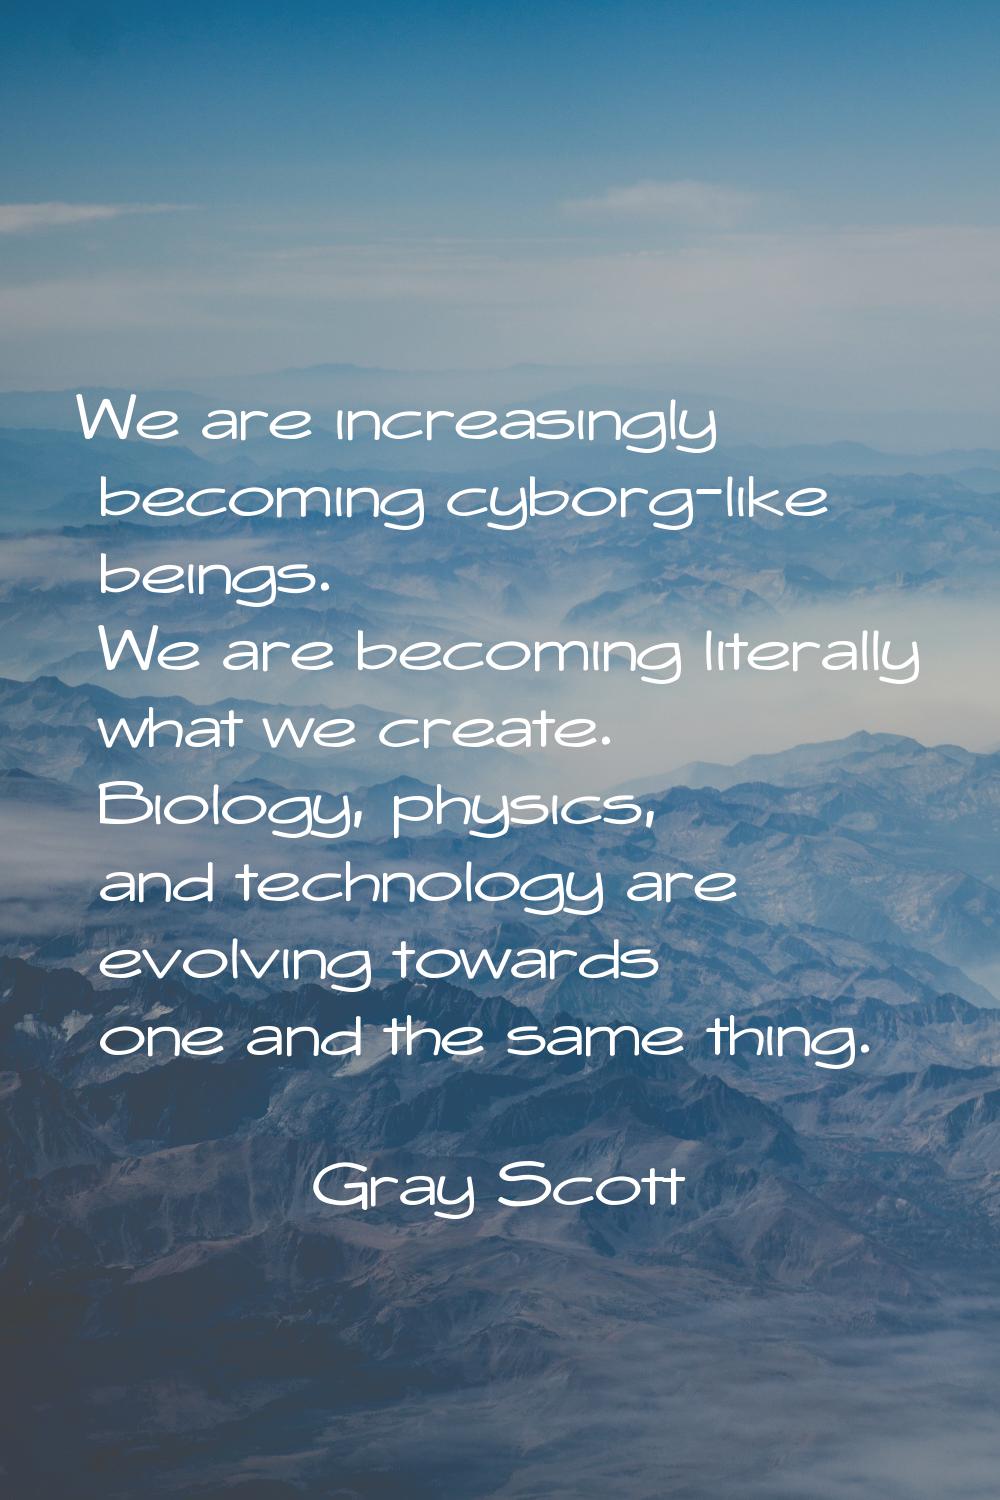 We are increasingly becoming cyborg-like beings. We are becoming literally what we create. Biology,